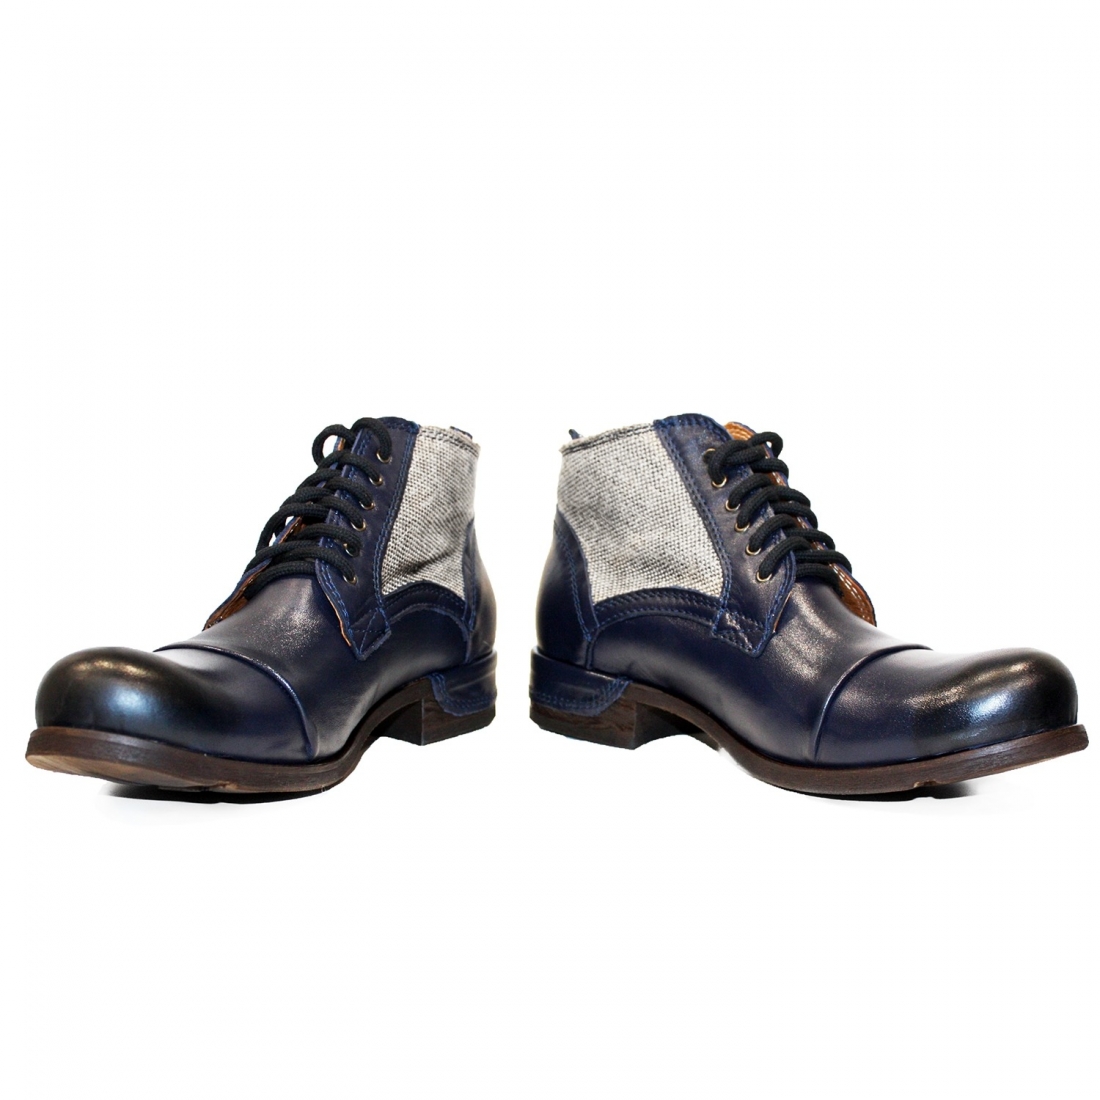 Modello Getretto - Schnürboots - Handmade Colorful Italian Leather Shoes